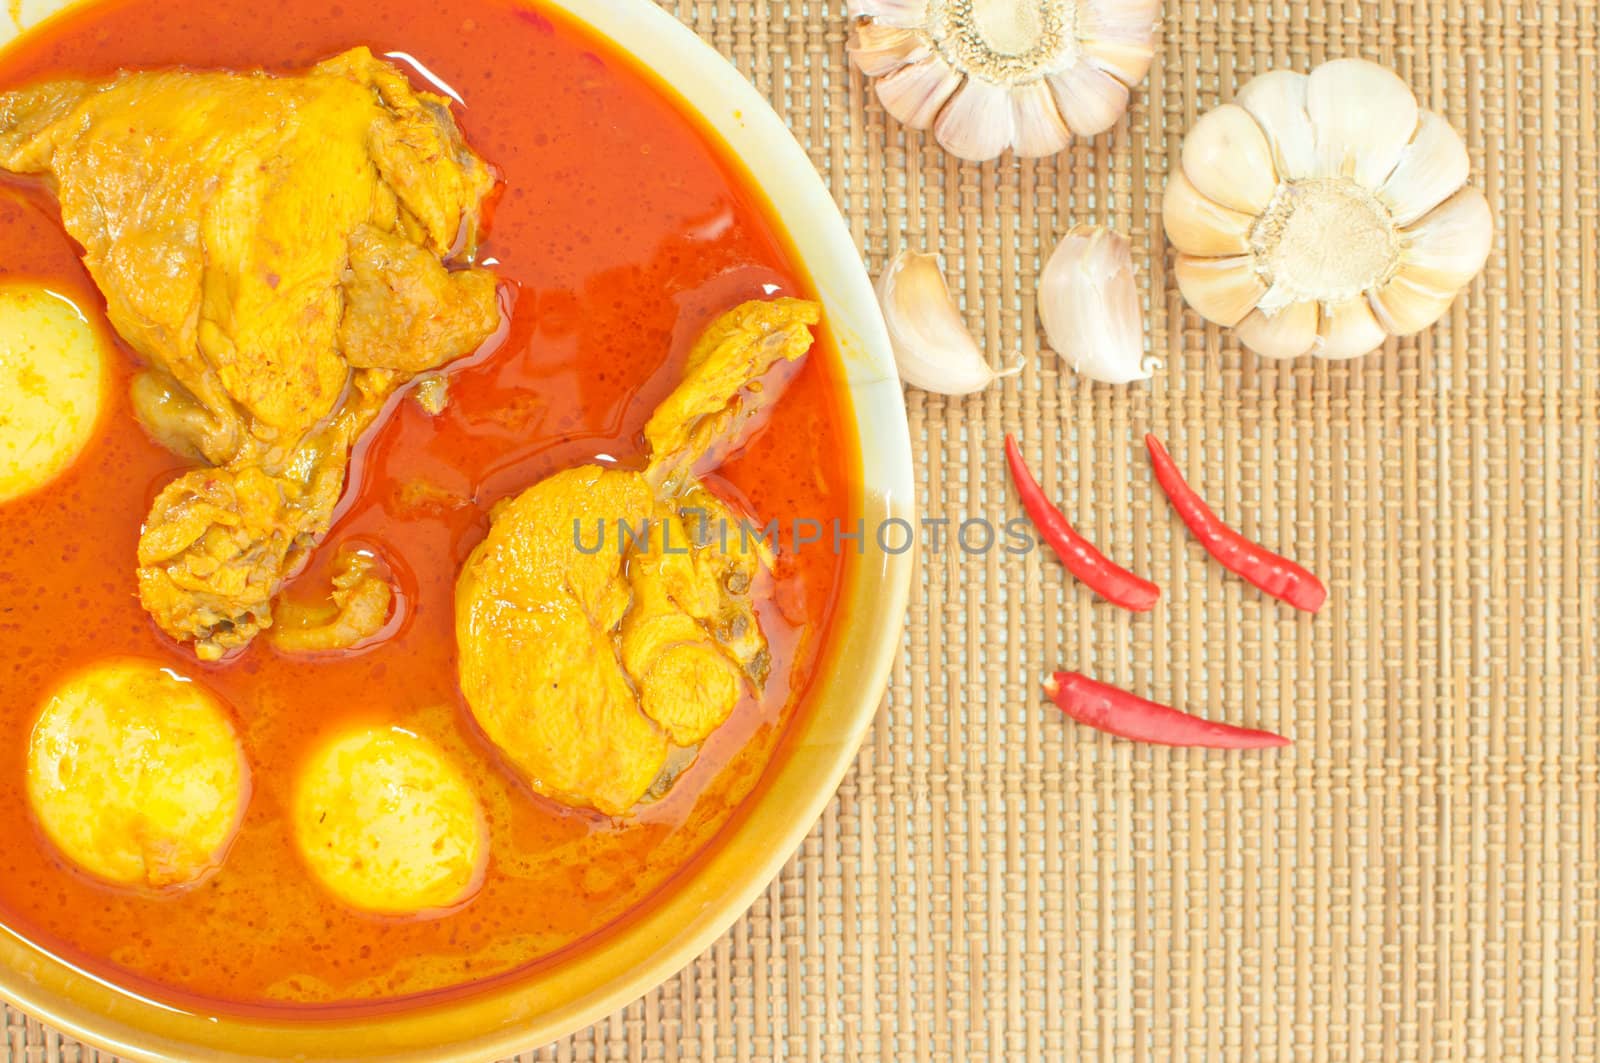 Most delicious spicy Thai food, Chicken curry (Mussaman curry) on bamboo mat background